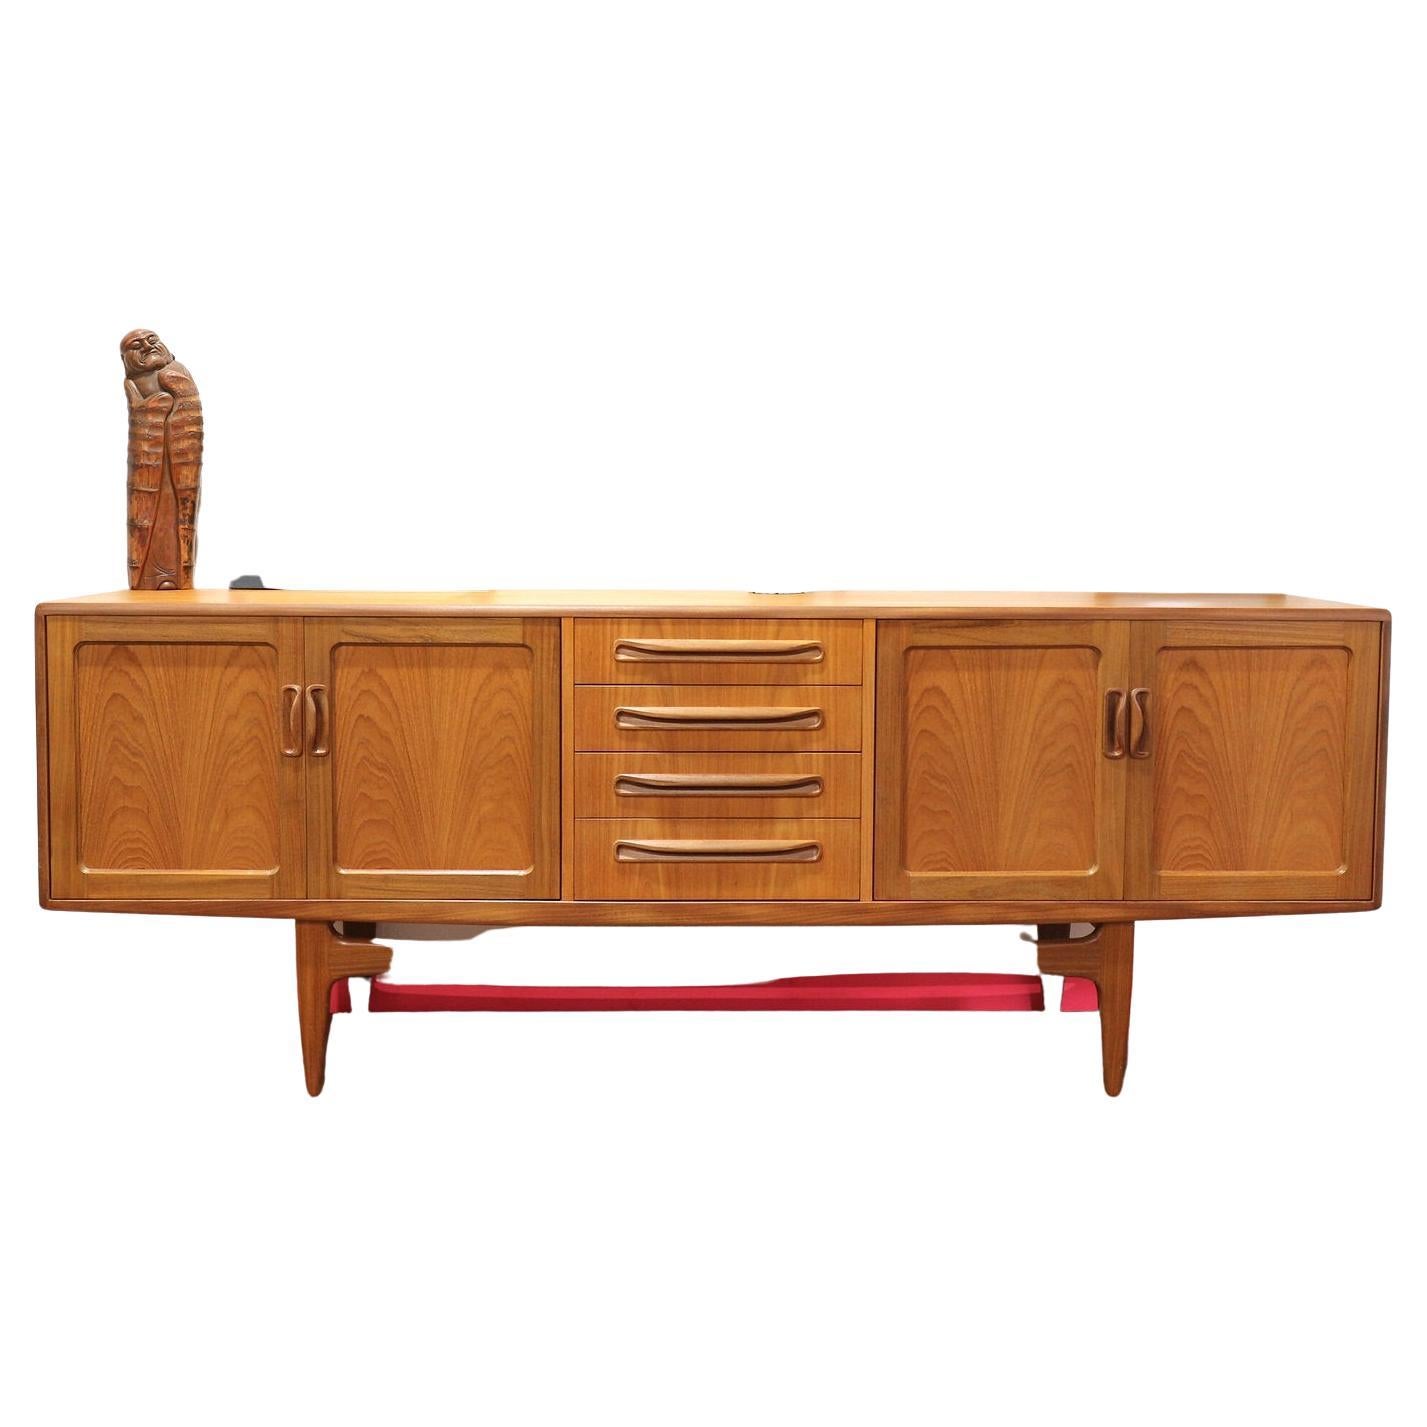 This fabulous G Plan credenza is part of the fresco range and designed by V B Wilkins around 1965. This is a classic british credenza with danish style making it one of the most popular credenza made by G plan, a real statement piece

 

The